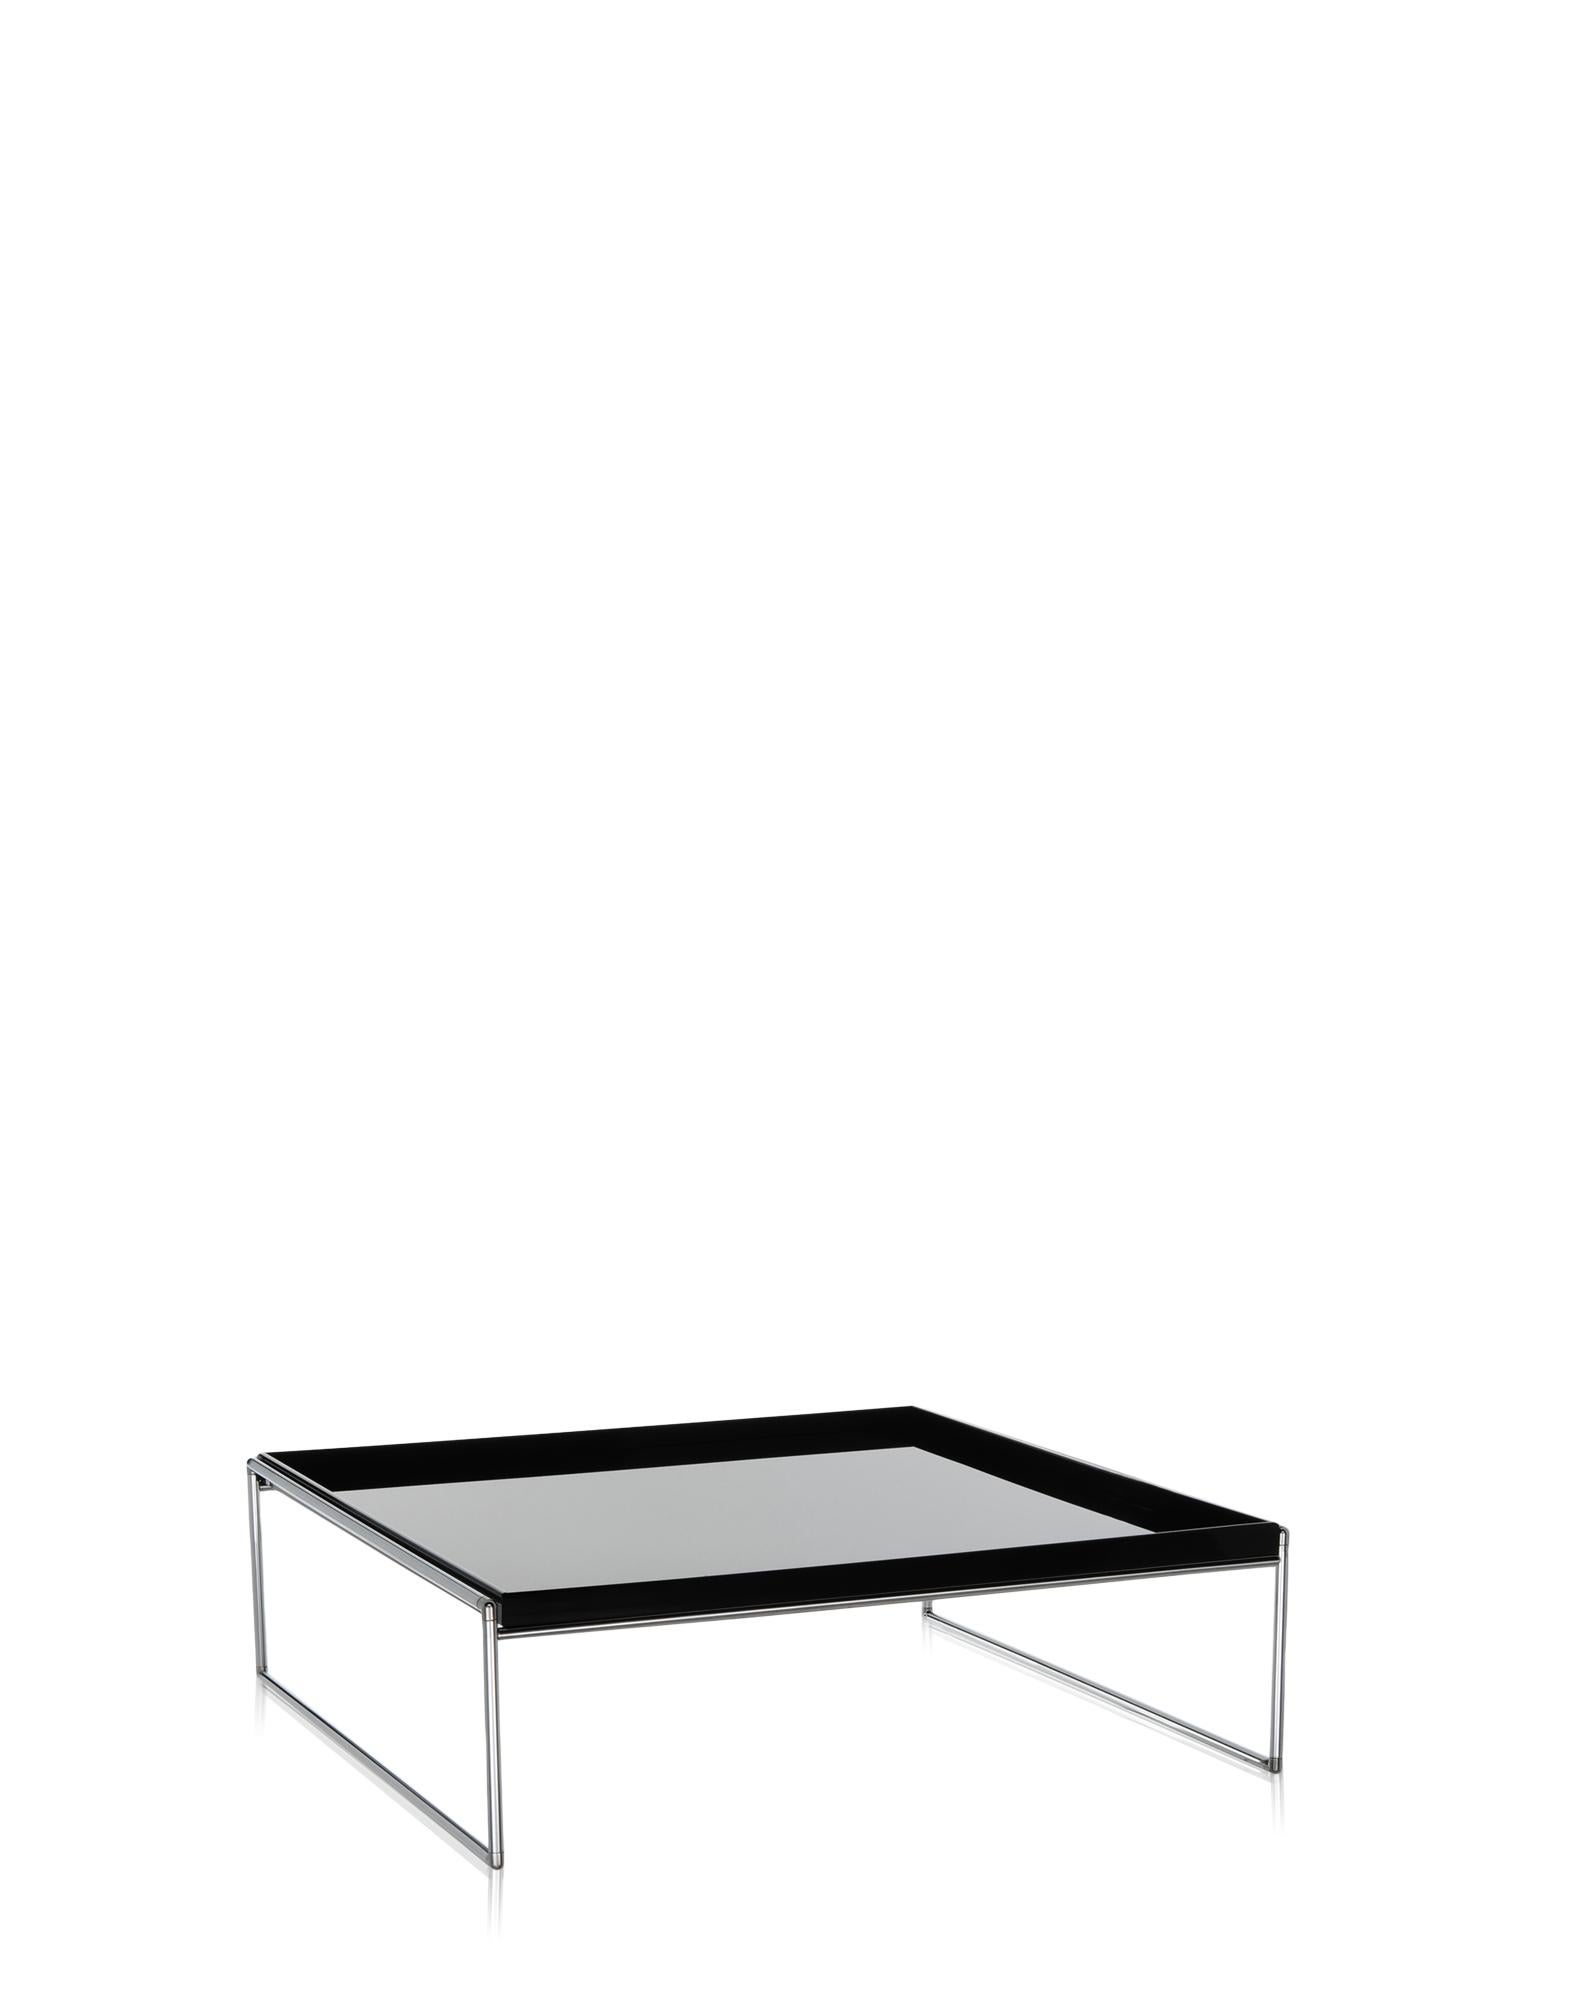 Kartell Square Tray Table by Piero Lissoni In New Condition For Sale In Brooklyn, NY